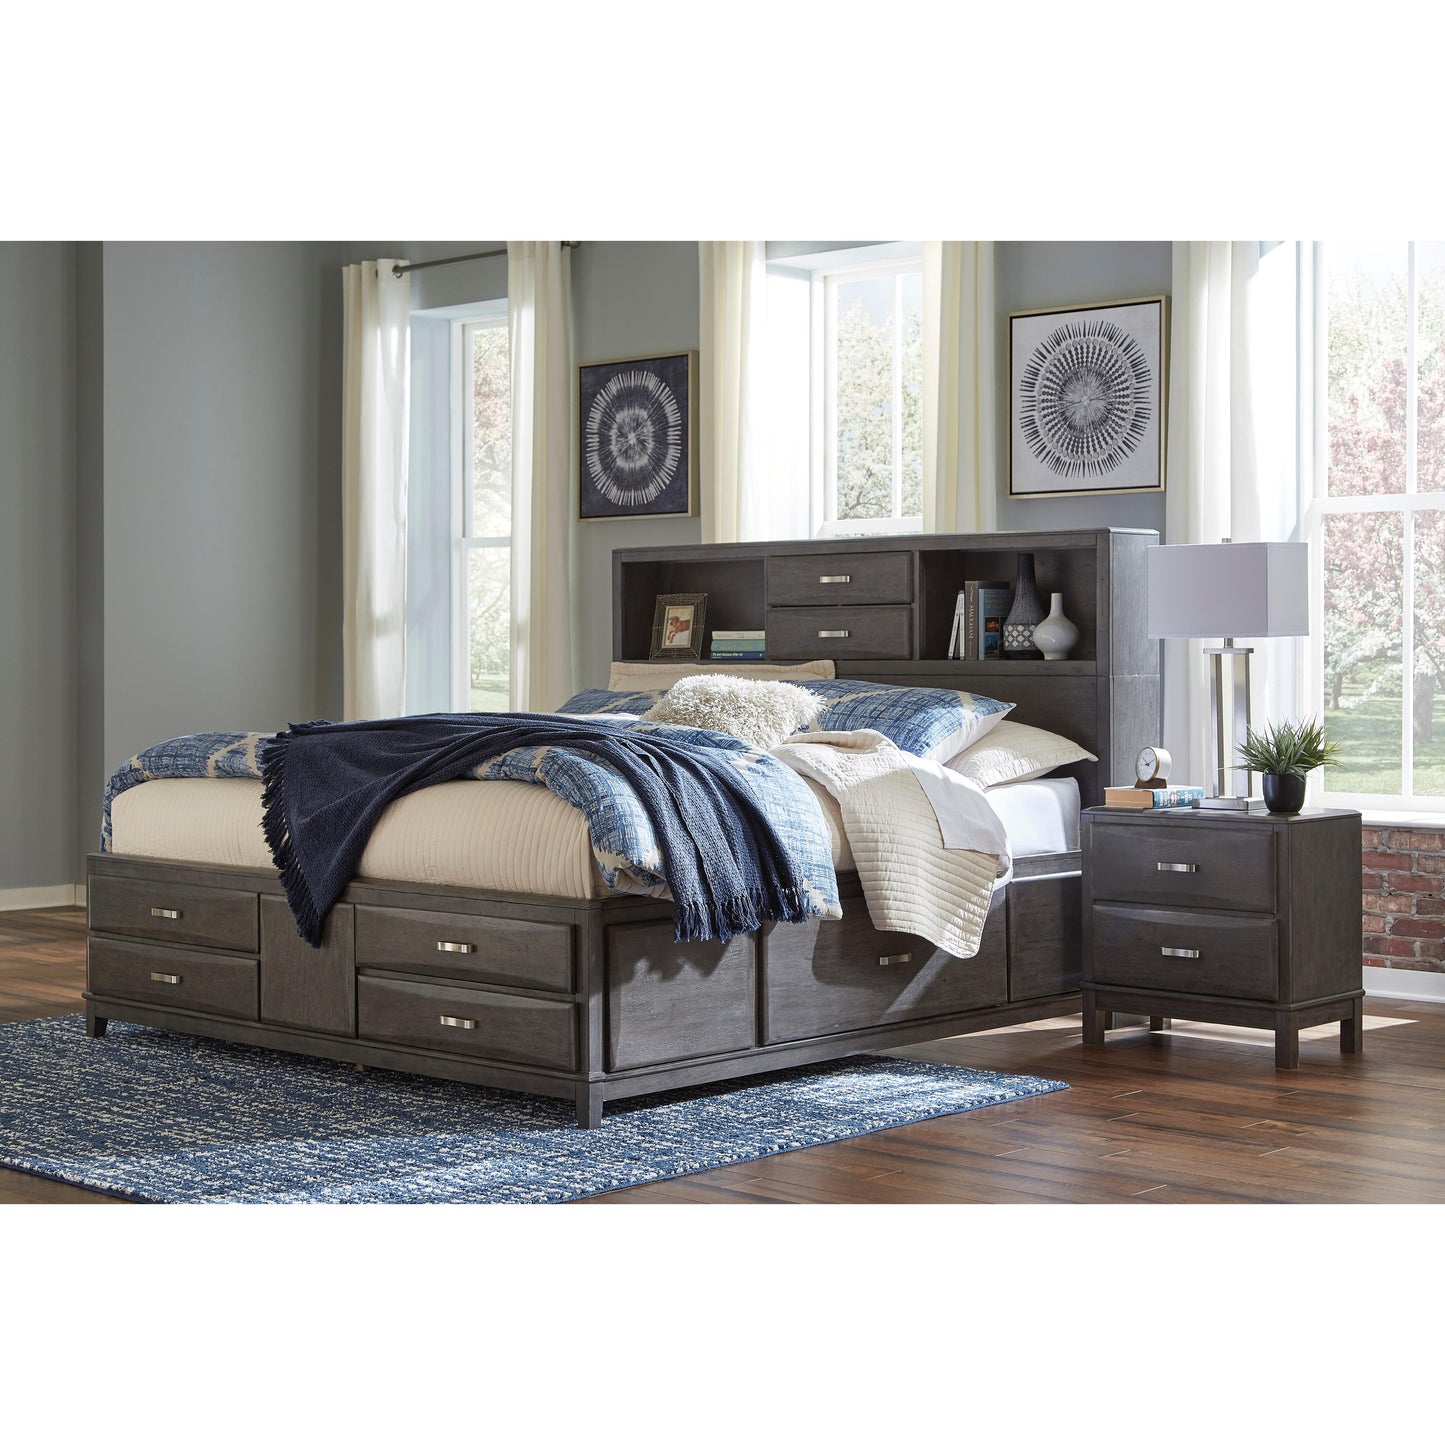 Signature Design by Ashley Caitbrook Queen Bookcase Bed with Storage B476-65/B476-64/B476-98